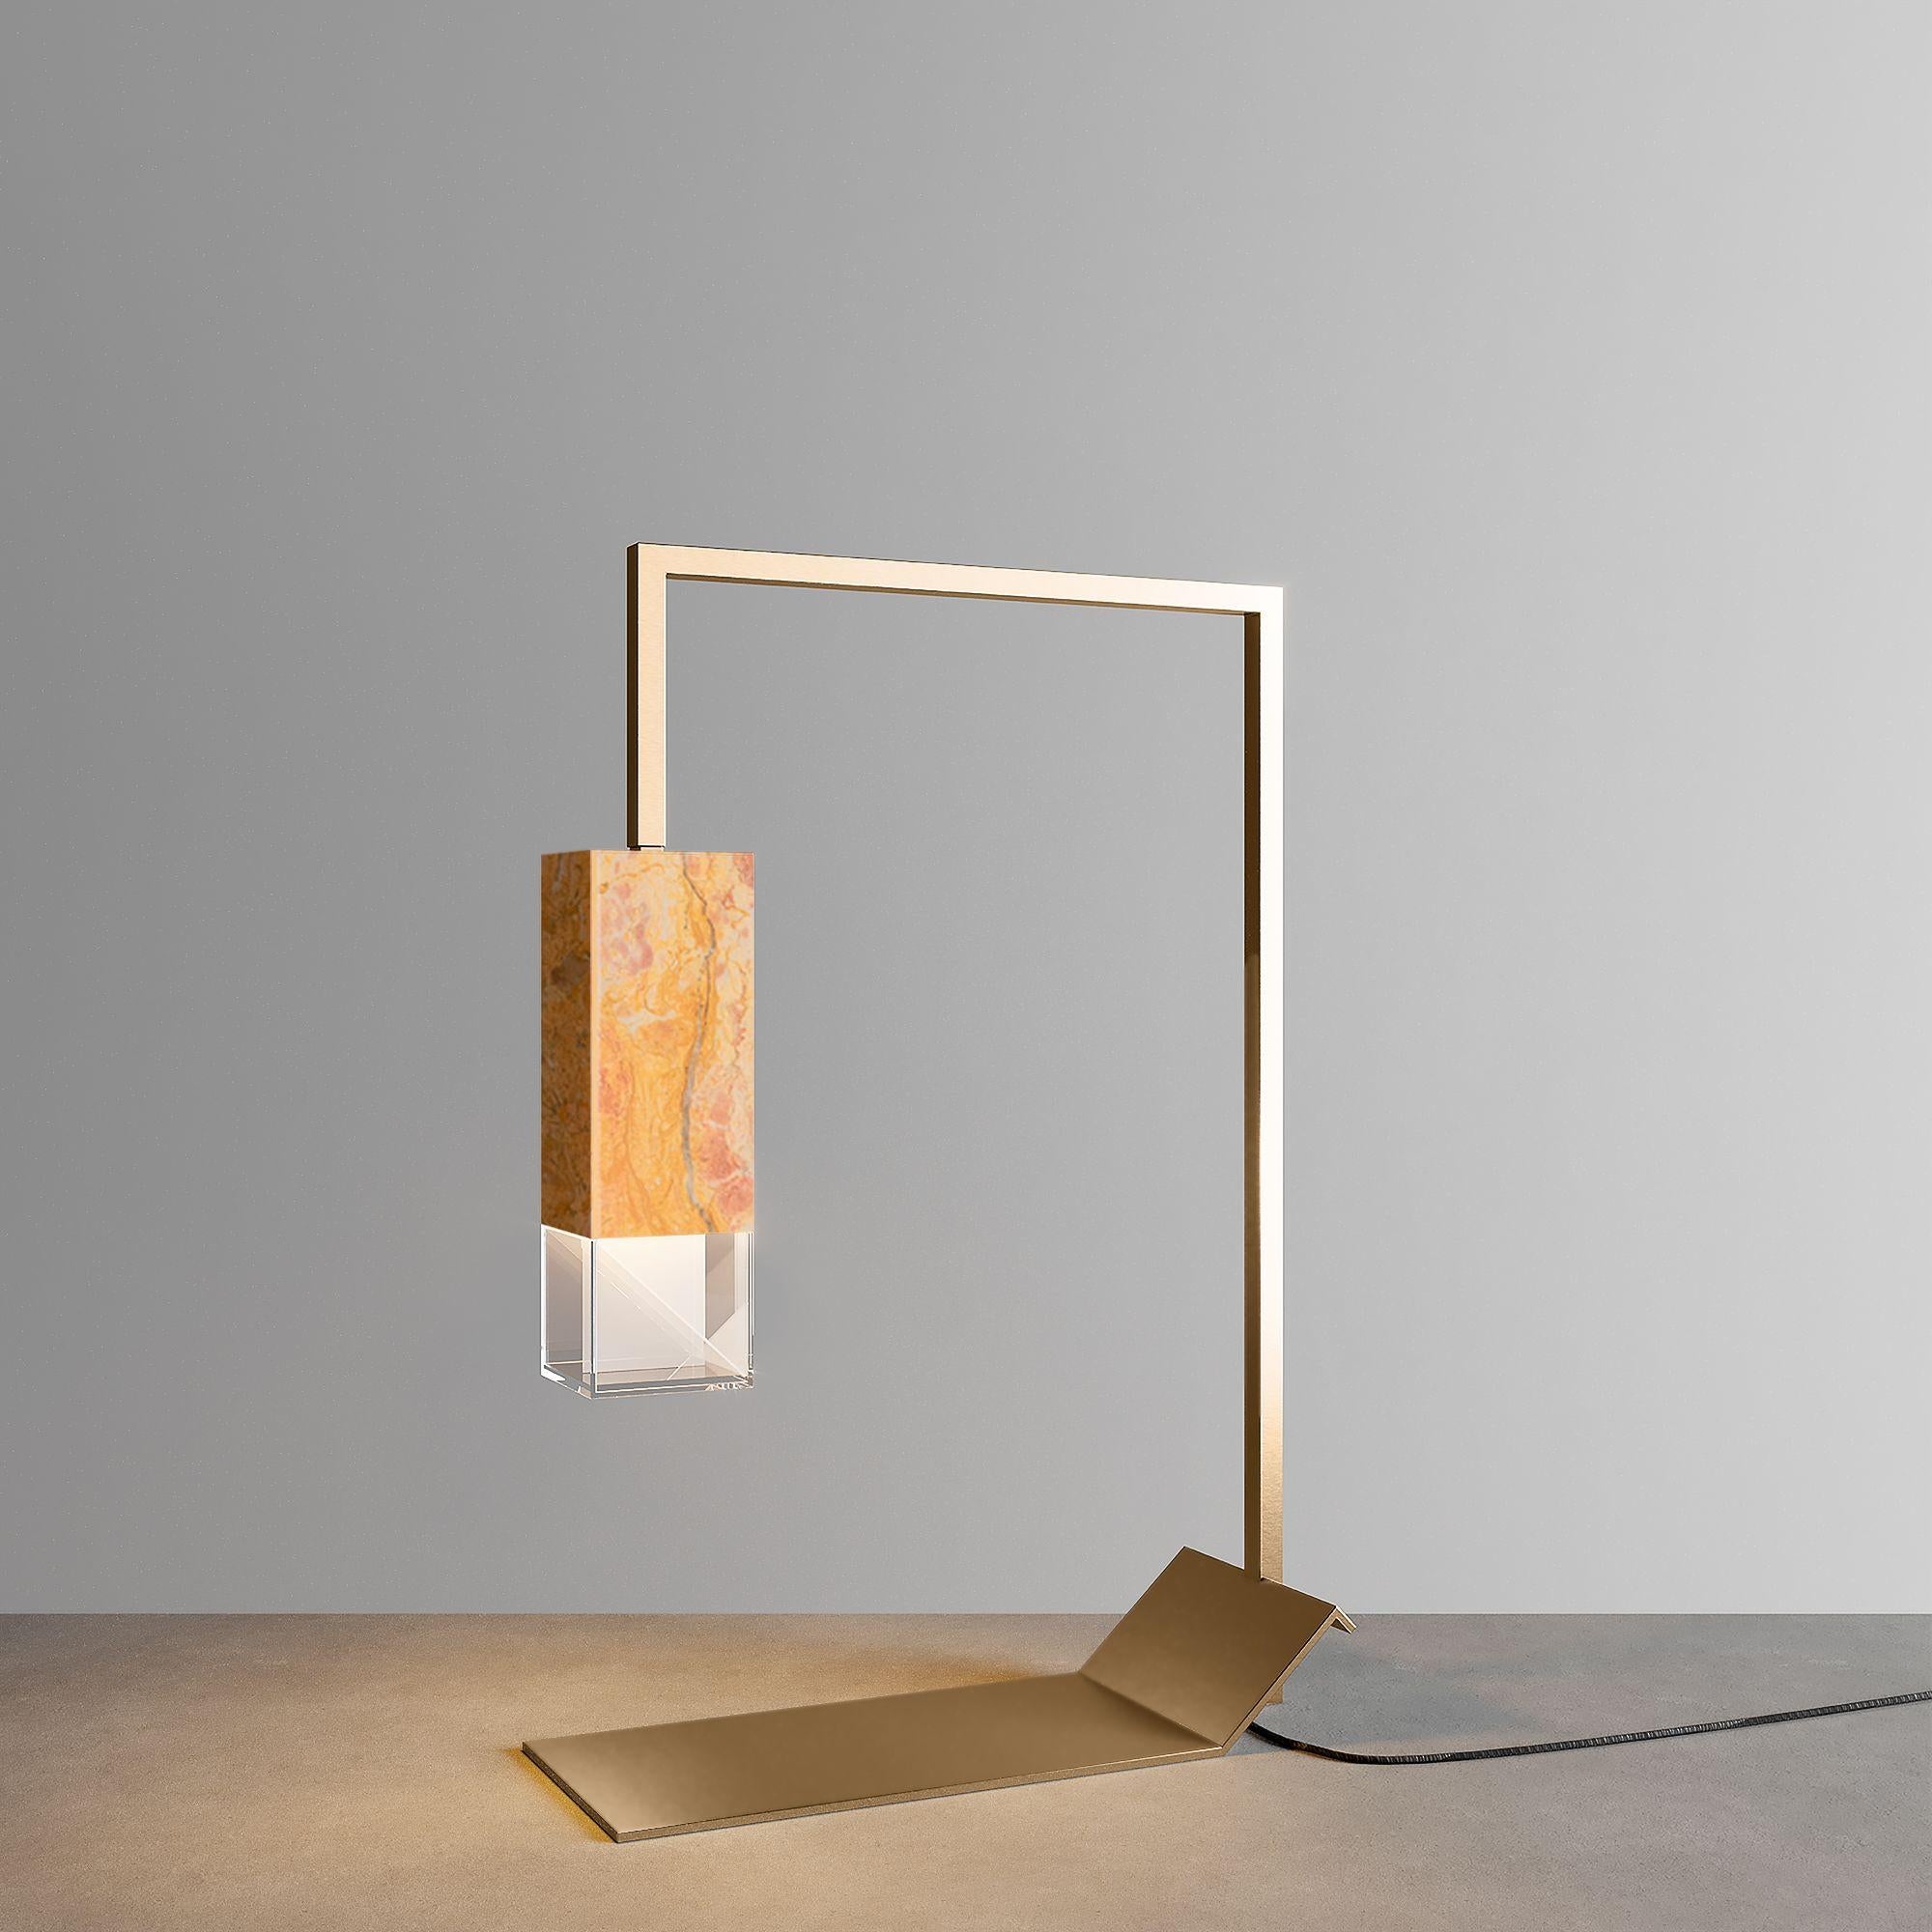 Marble table lamp colour Edition by Formaminima
Dimensions: W 10 x D 25 x H 40 cm
Materials: Solid marble royal pink yellow, brass

All our lamps can be wired according to each country. If sold to the USA it will be wired for the USA for